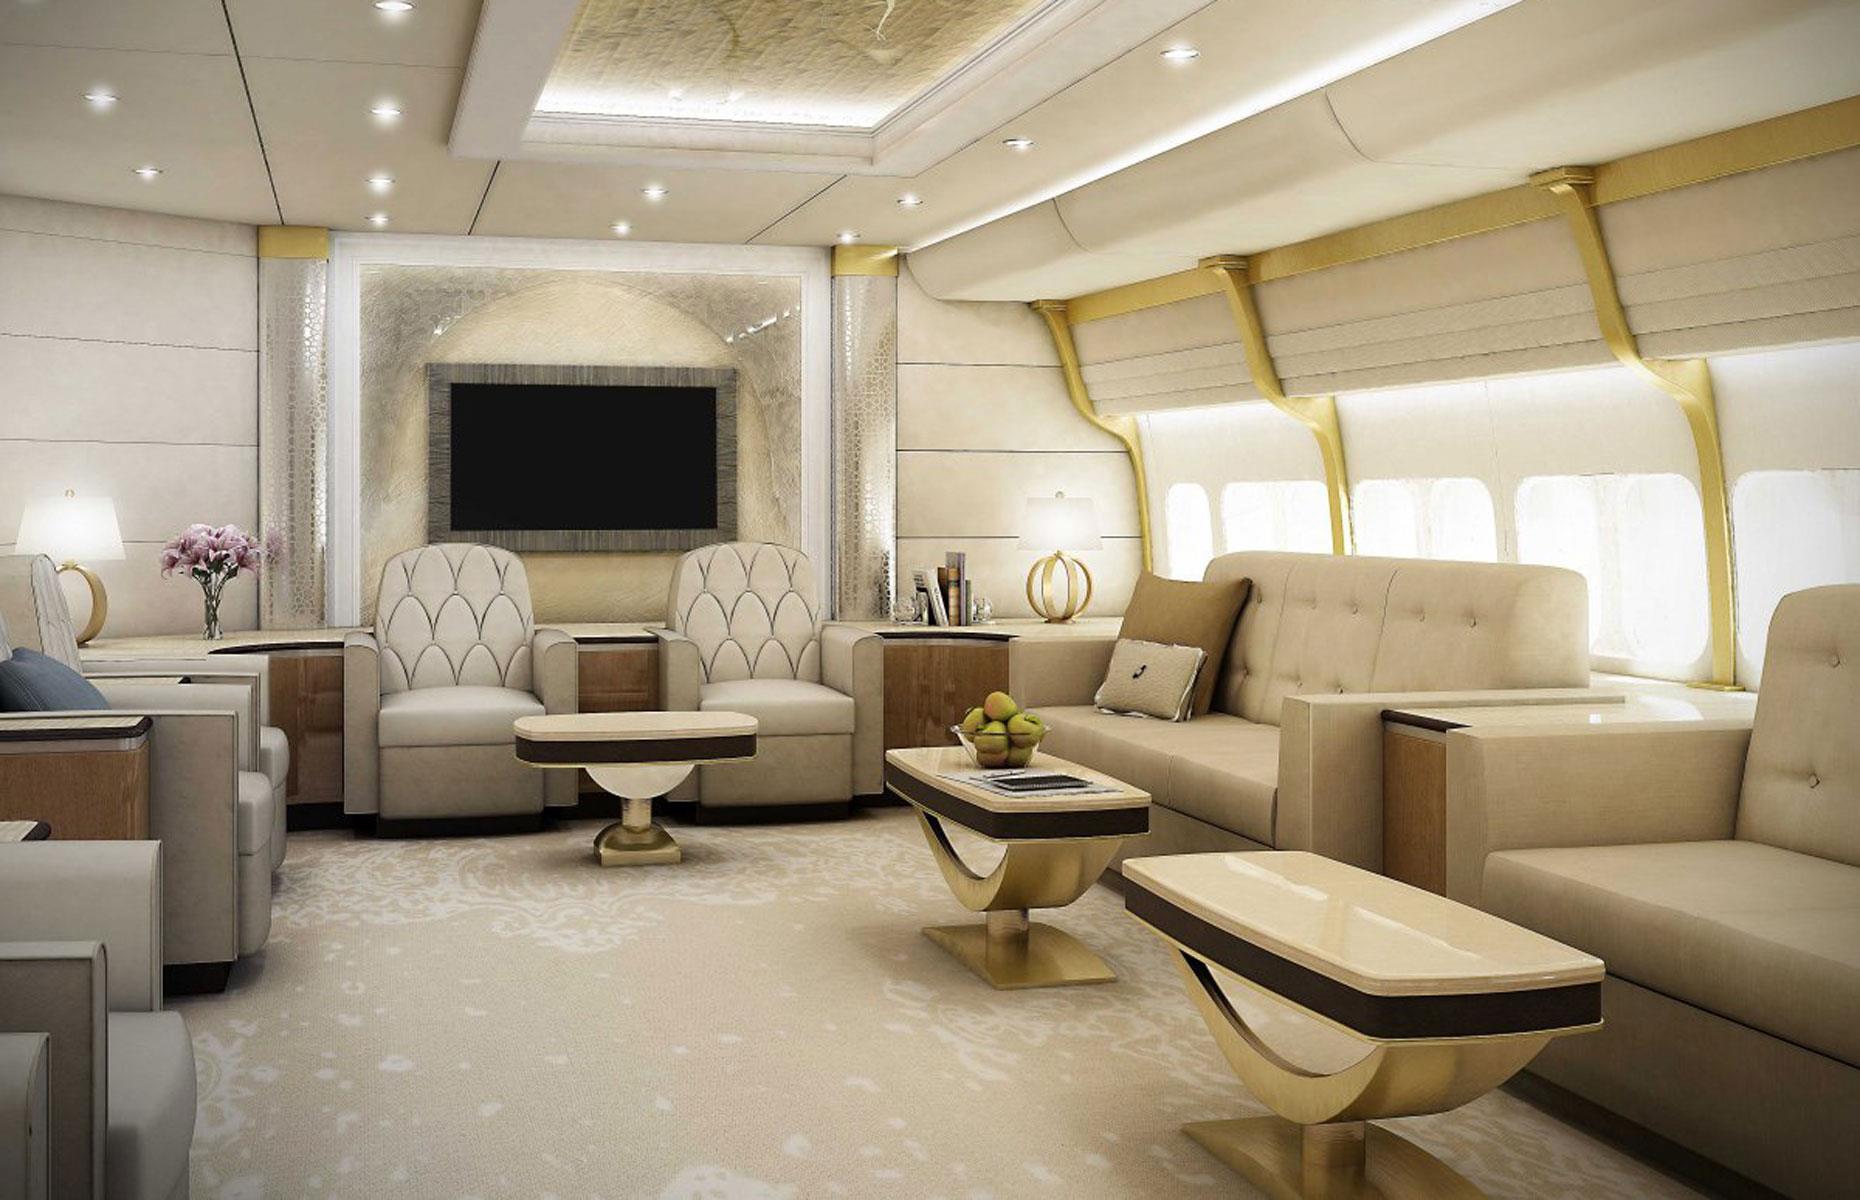 <p>Lau's private jet has a master bedroom suite and also features a guest cabin, several living room spaces, office facilities, and a dining room.</p>  <p>While there aren't photos of Lau's undoubtedly luxurious interiors, Boeing delivered the same plane to a private client in 2016 (pictured). This version was designed and fitted by Greenpoint Technologies. </p>